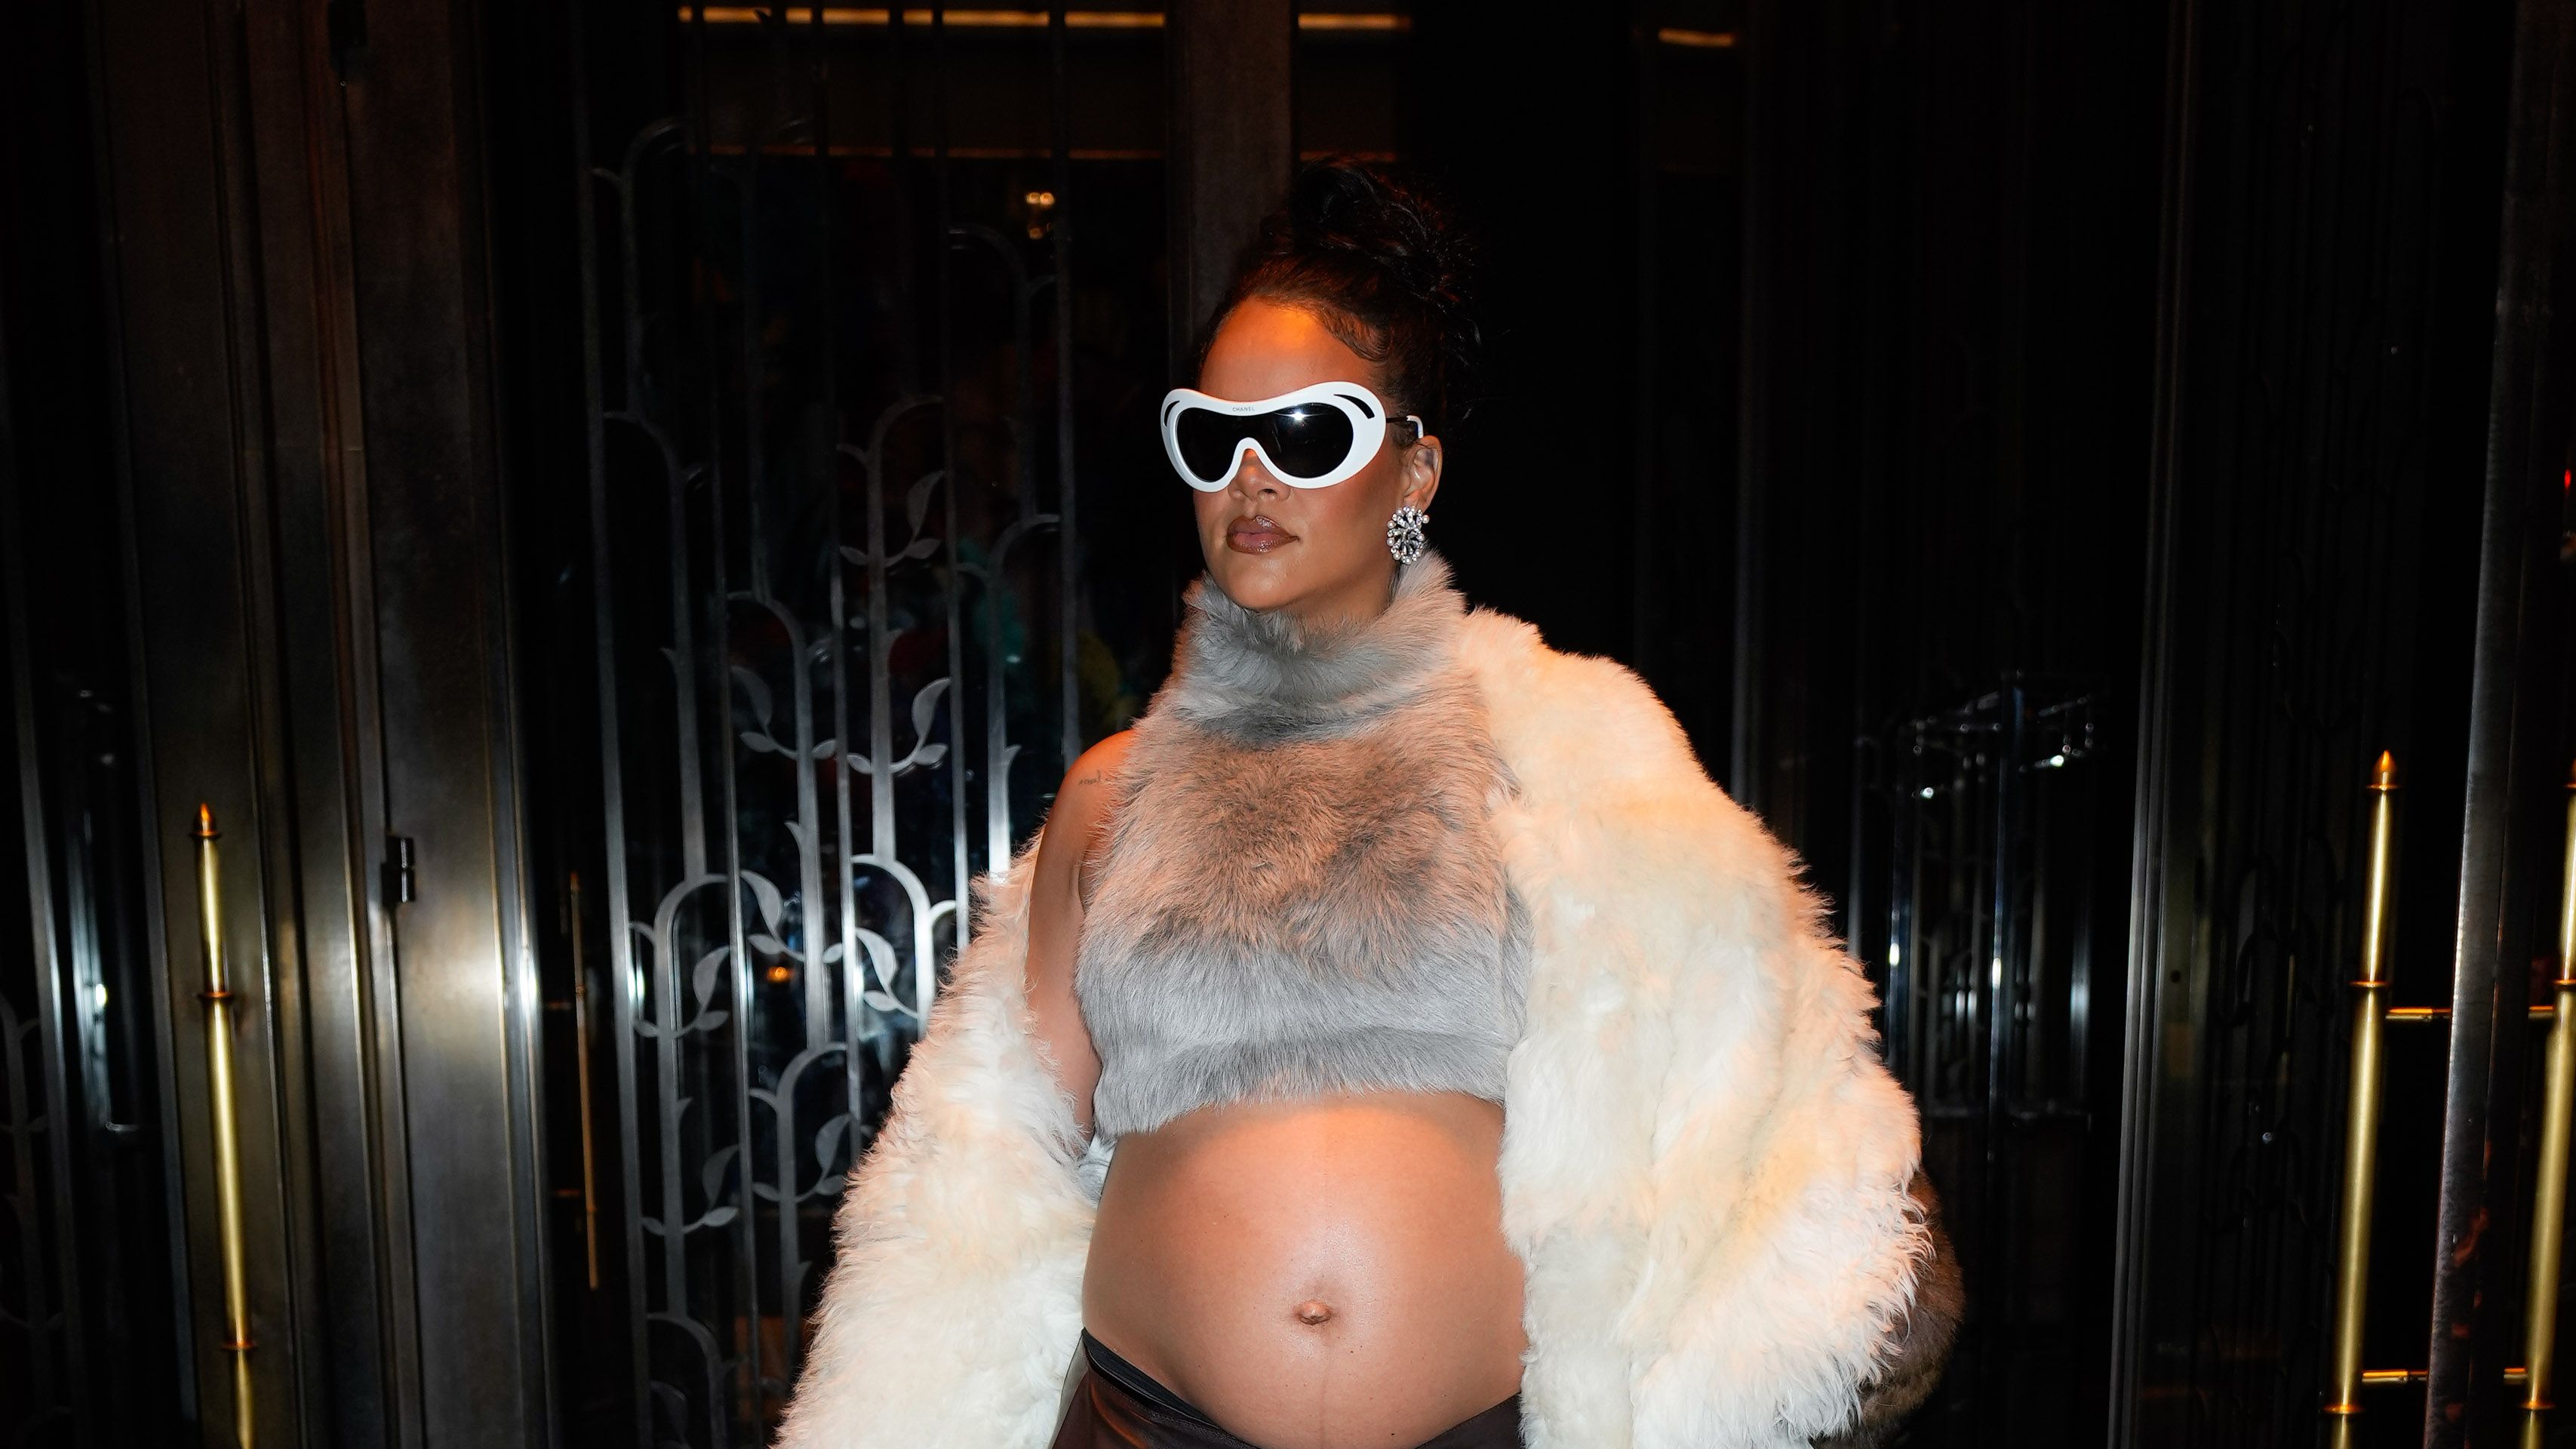 Rihanna Might Have Found The Most Perfect Clothing Item For Her Baby: Photo  4733176, Rihanna Photos